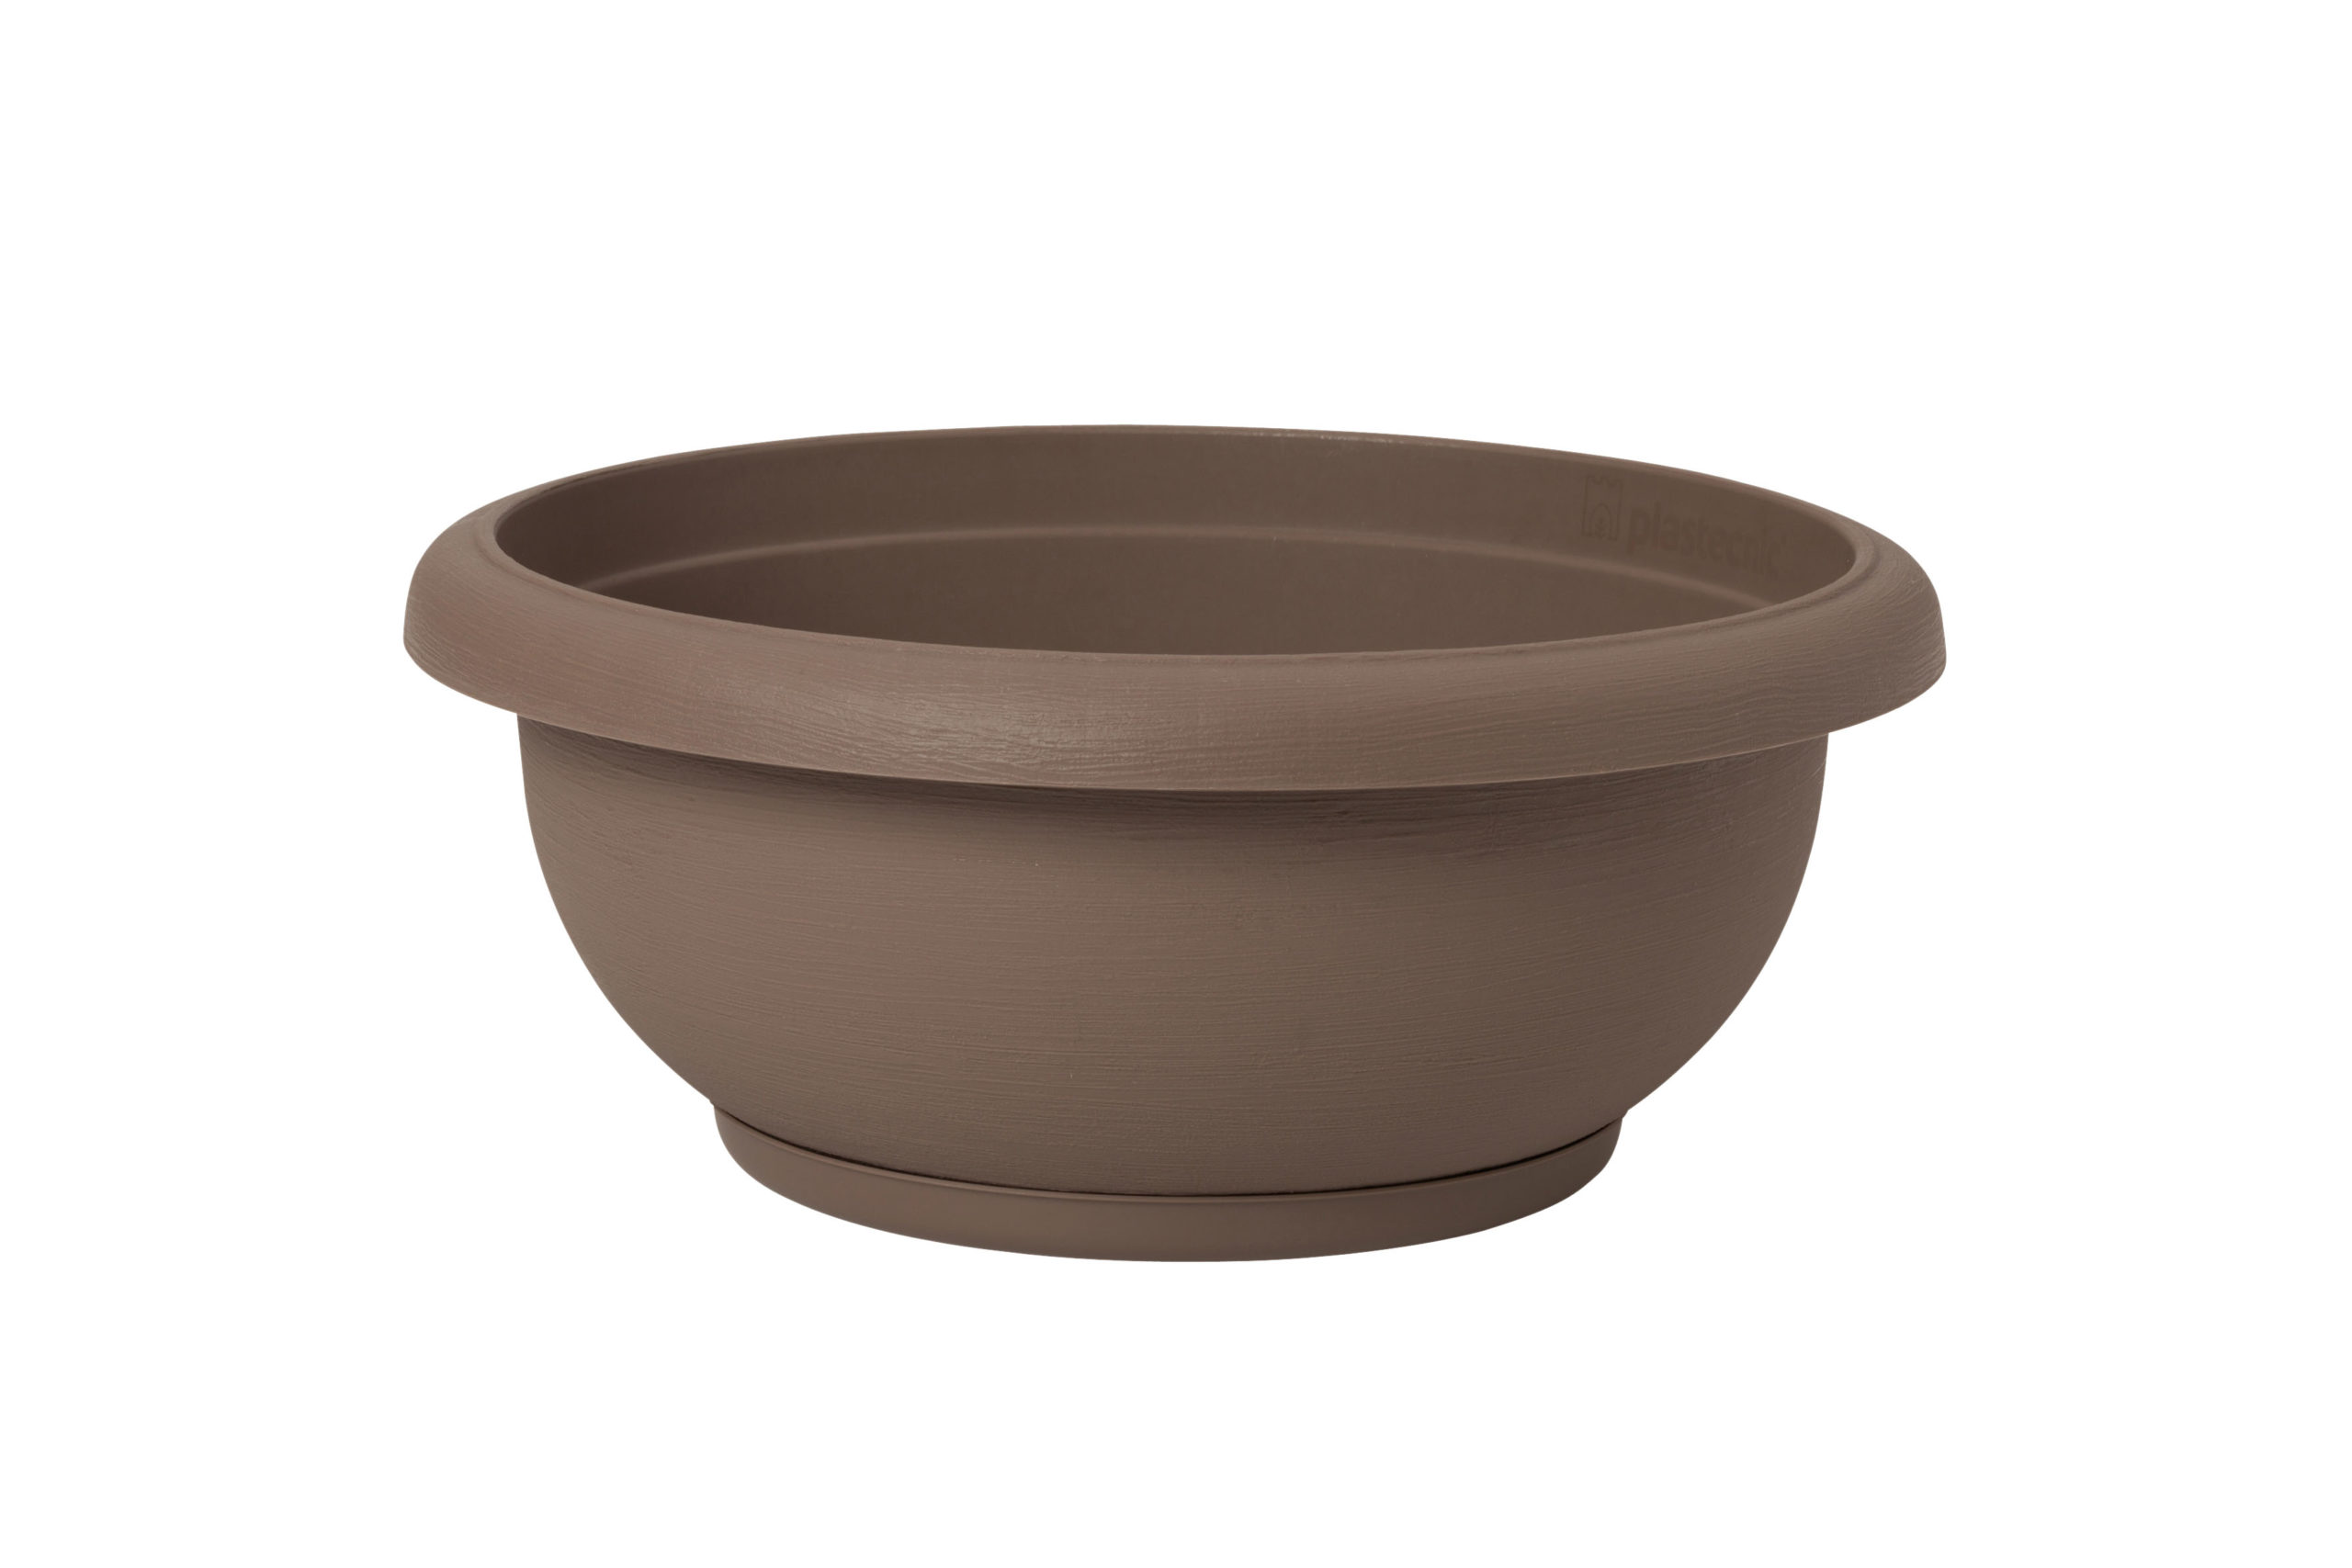 ROUND POT SAUCER - Products Treadstone